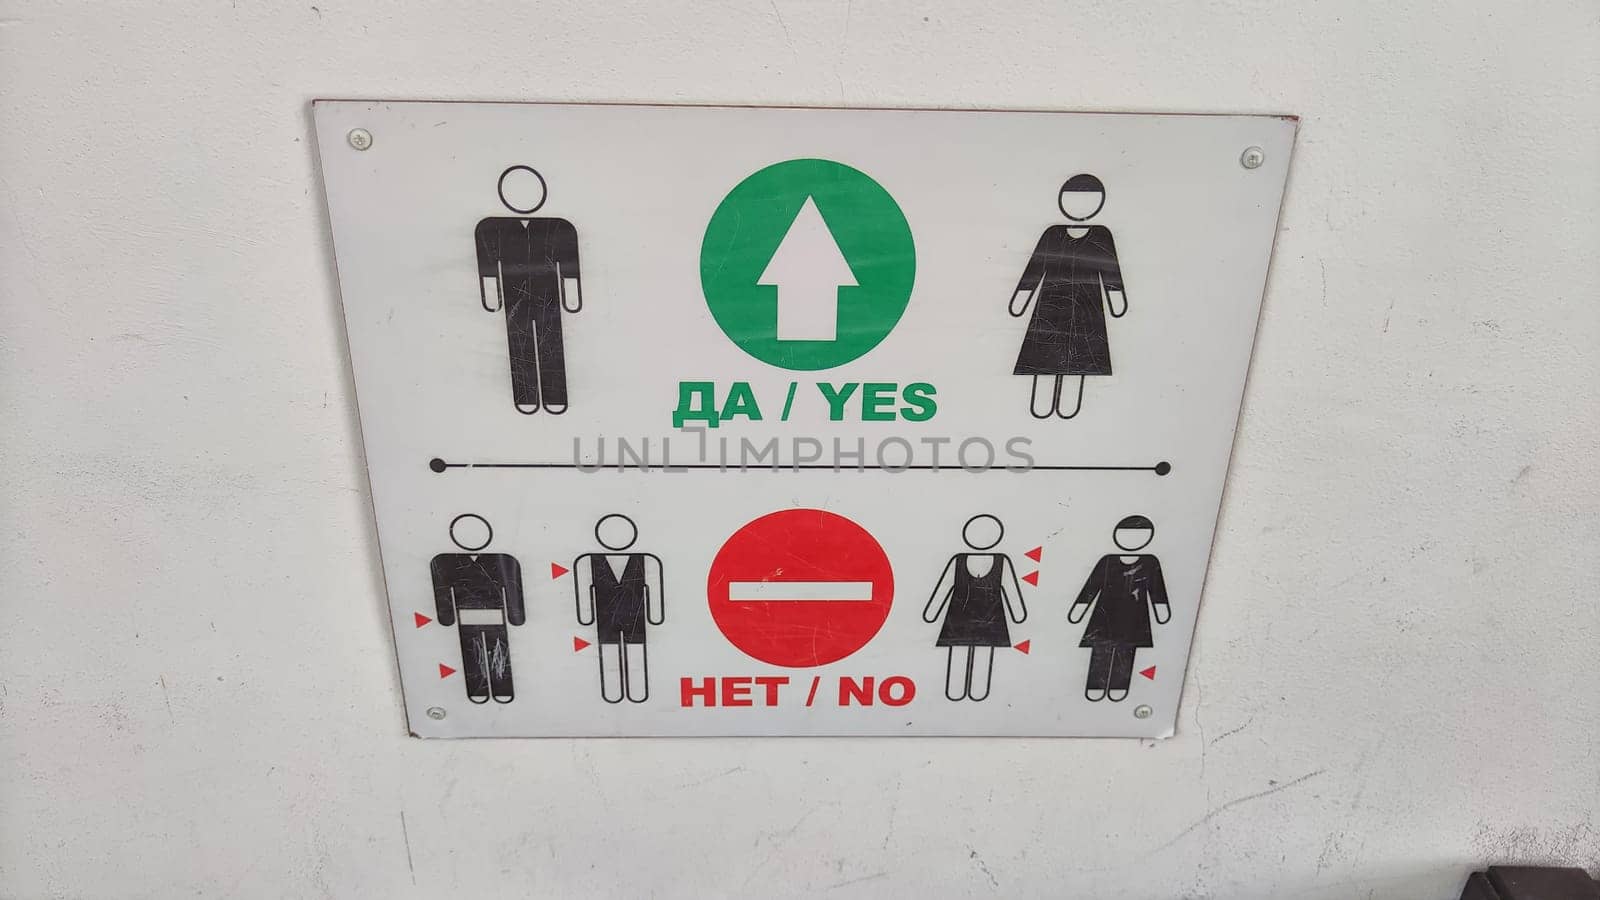 Bilingual Directions for Restroom Access Displayed on Sign. Sign indicating separate bathroom access with bilingual Yes and No directions